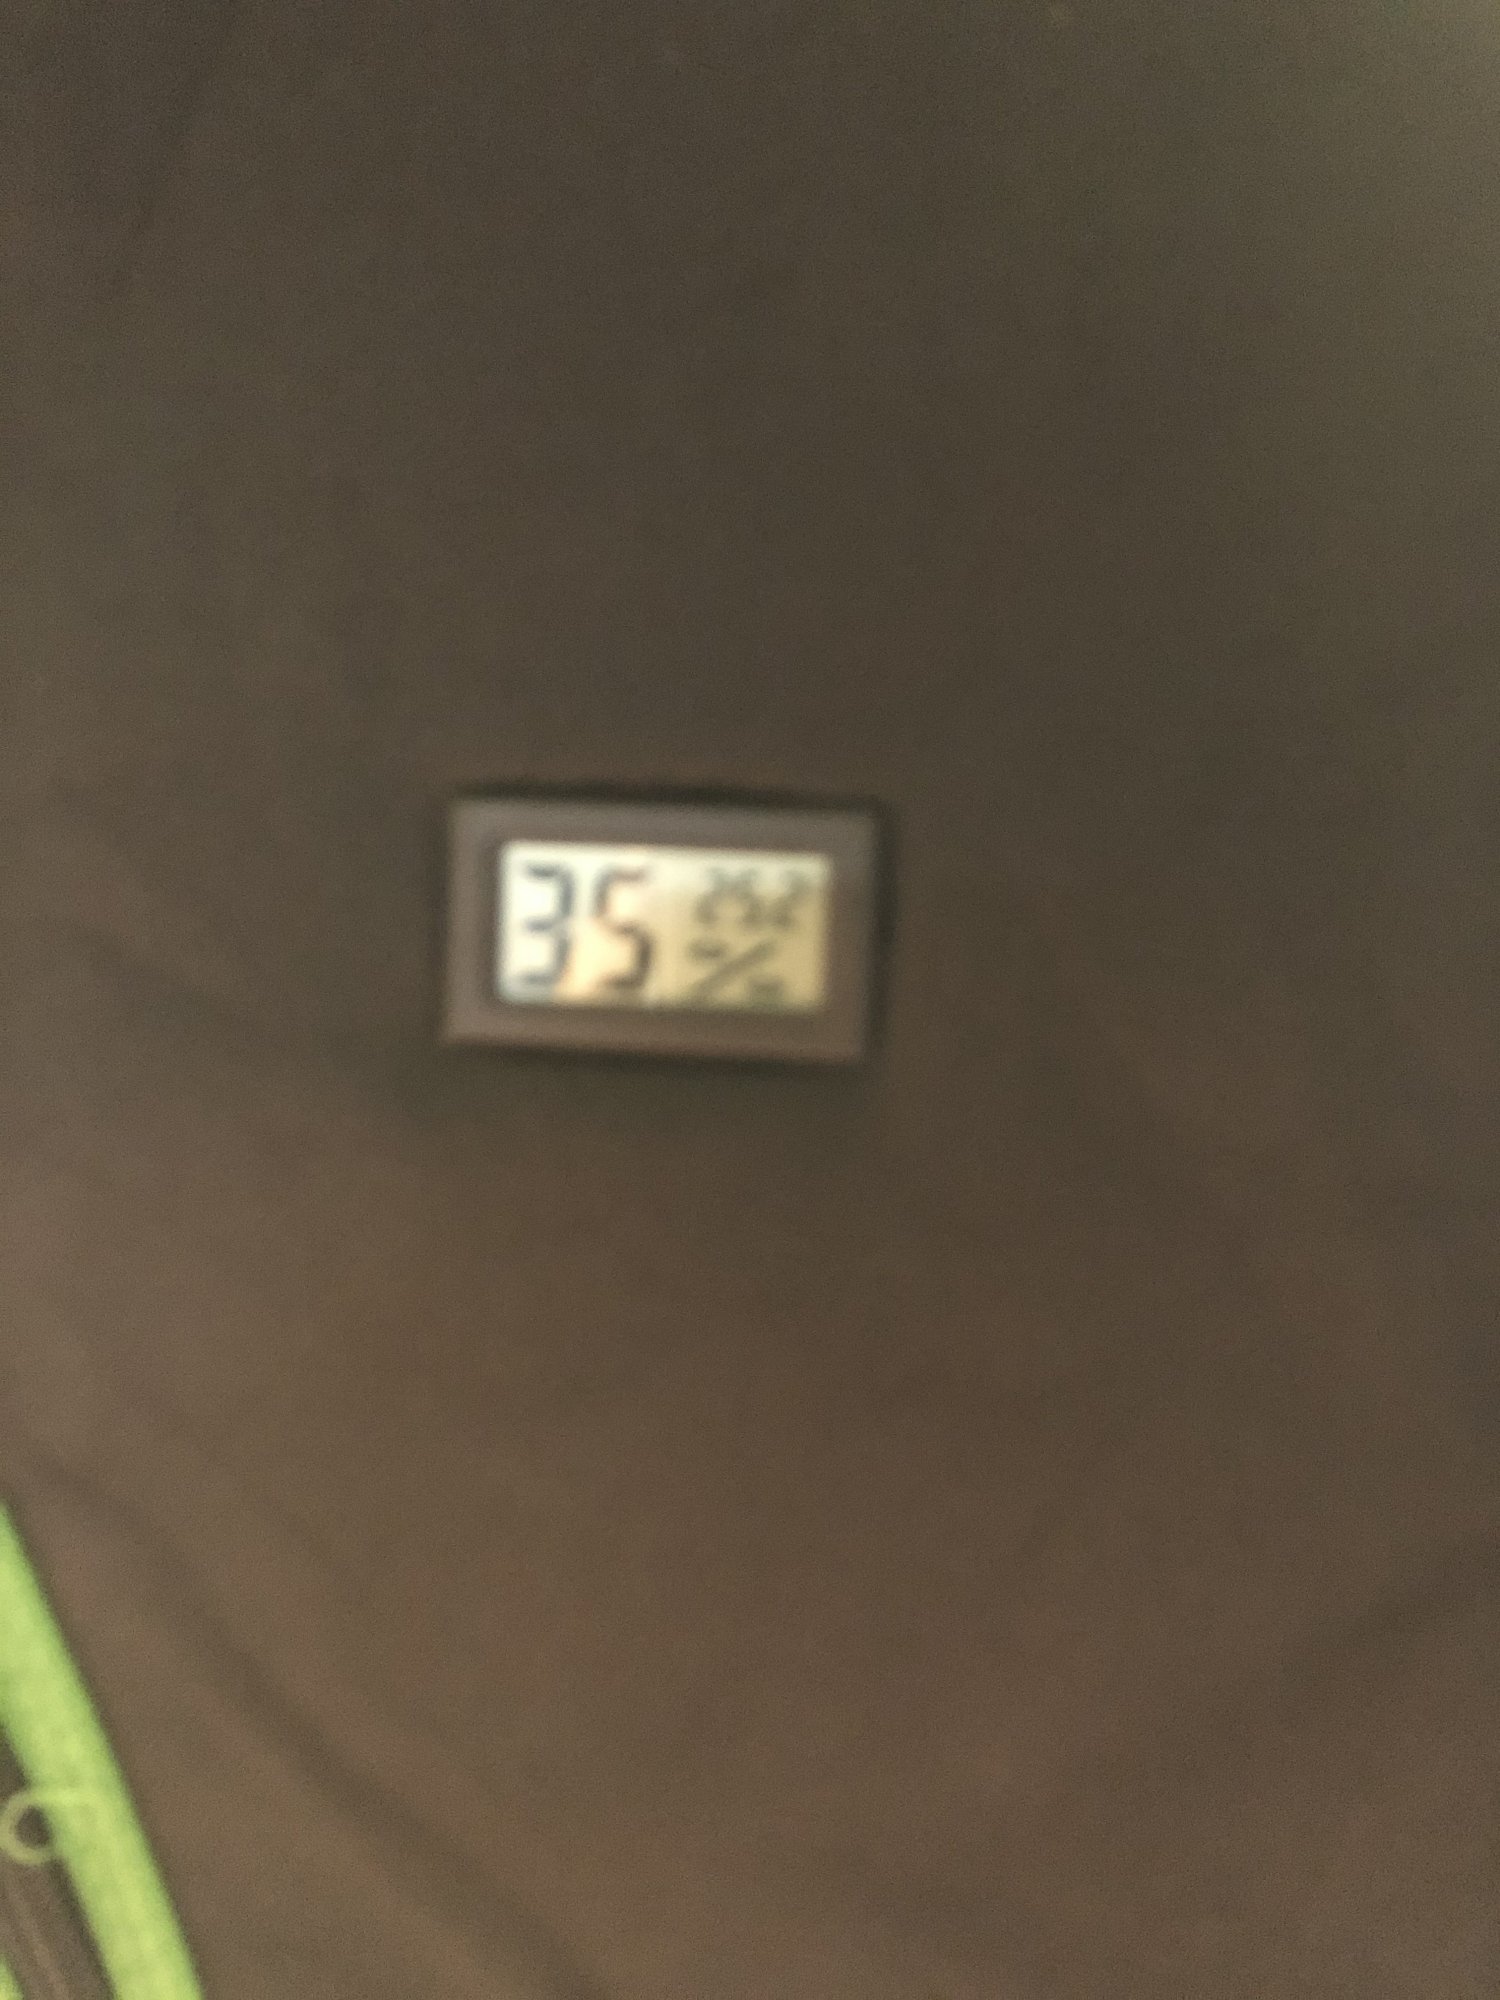 What is my tent humidity actually at 3